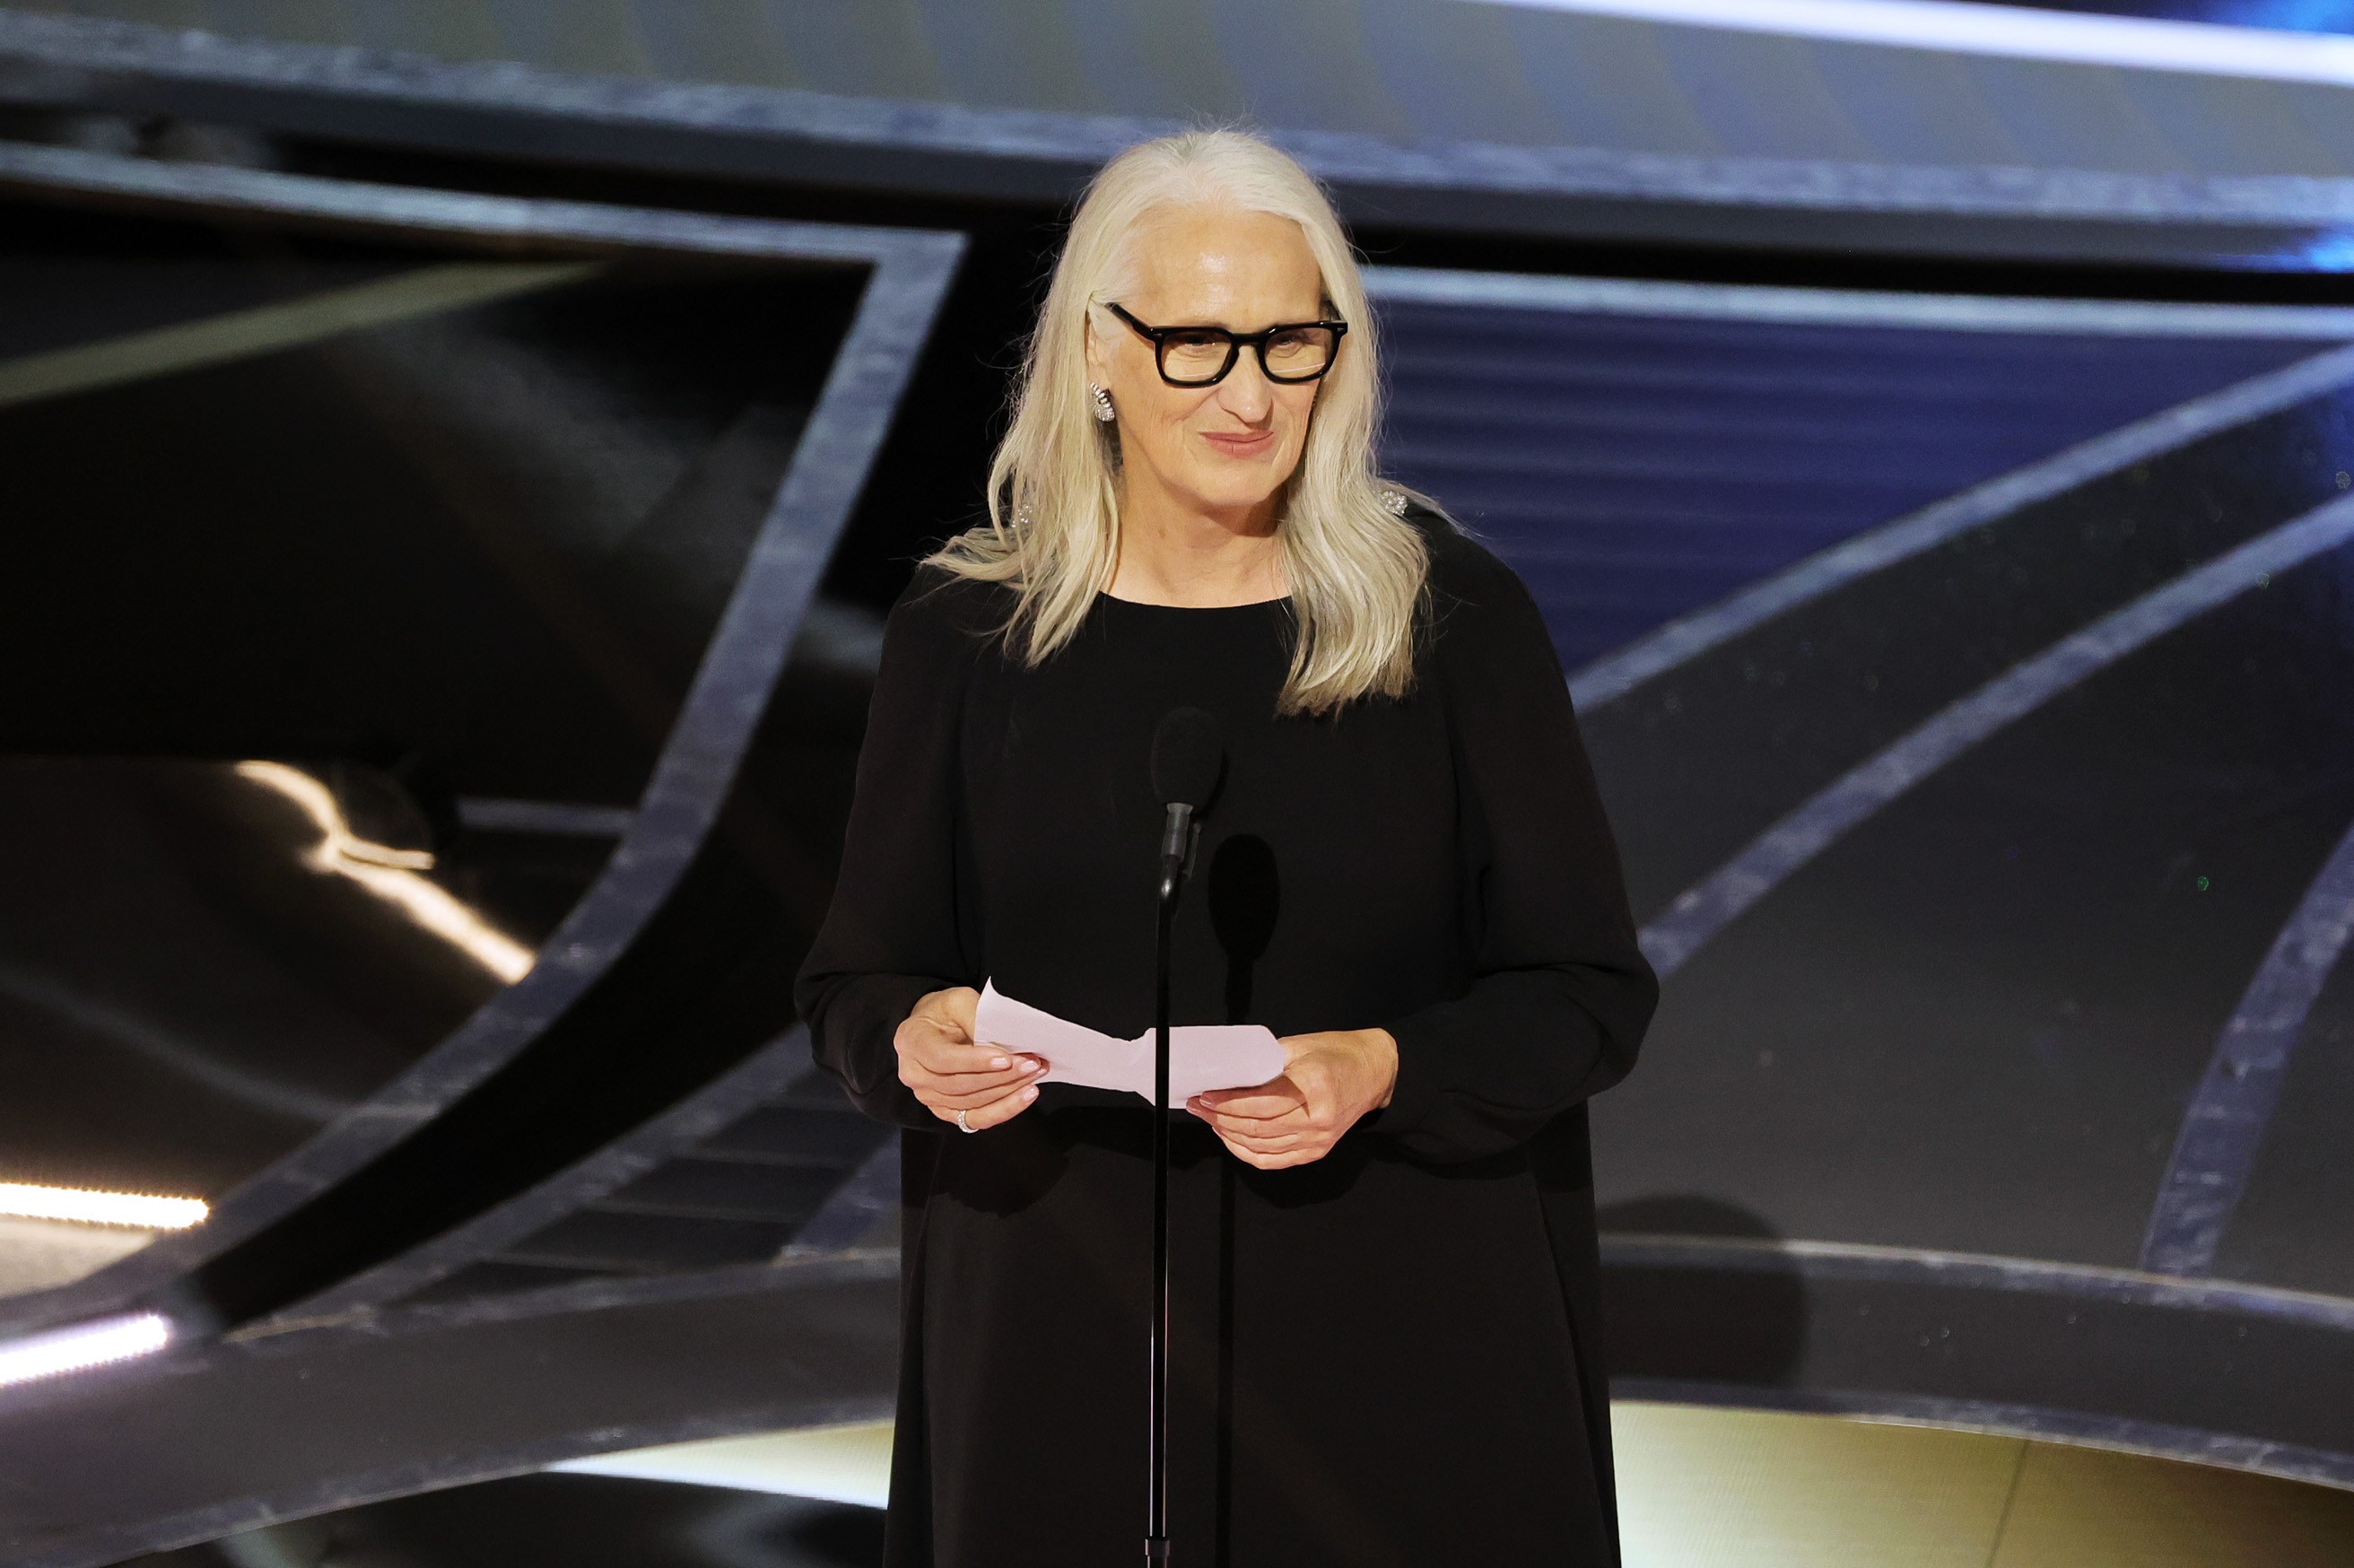 HOLLYWOOD, CALIFORNIA - MARCH 27: Jane Campion accepts the Directing award for ‘The Power of the Dog’ onstage during the 94th Annual Academy Awards at Dolby Theatre on March 27, 2022 in Hollywood, California. (Photo by Neilson Barnard/Getty Images) (Foto: Getty Images)